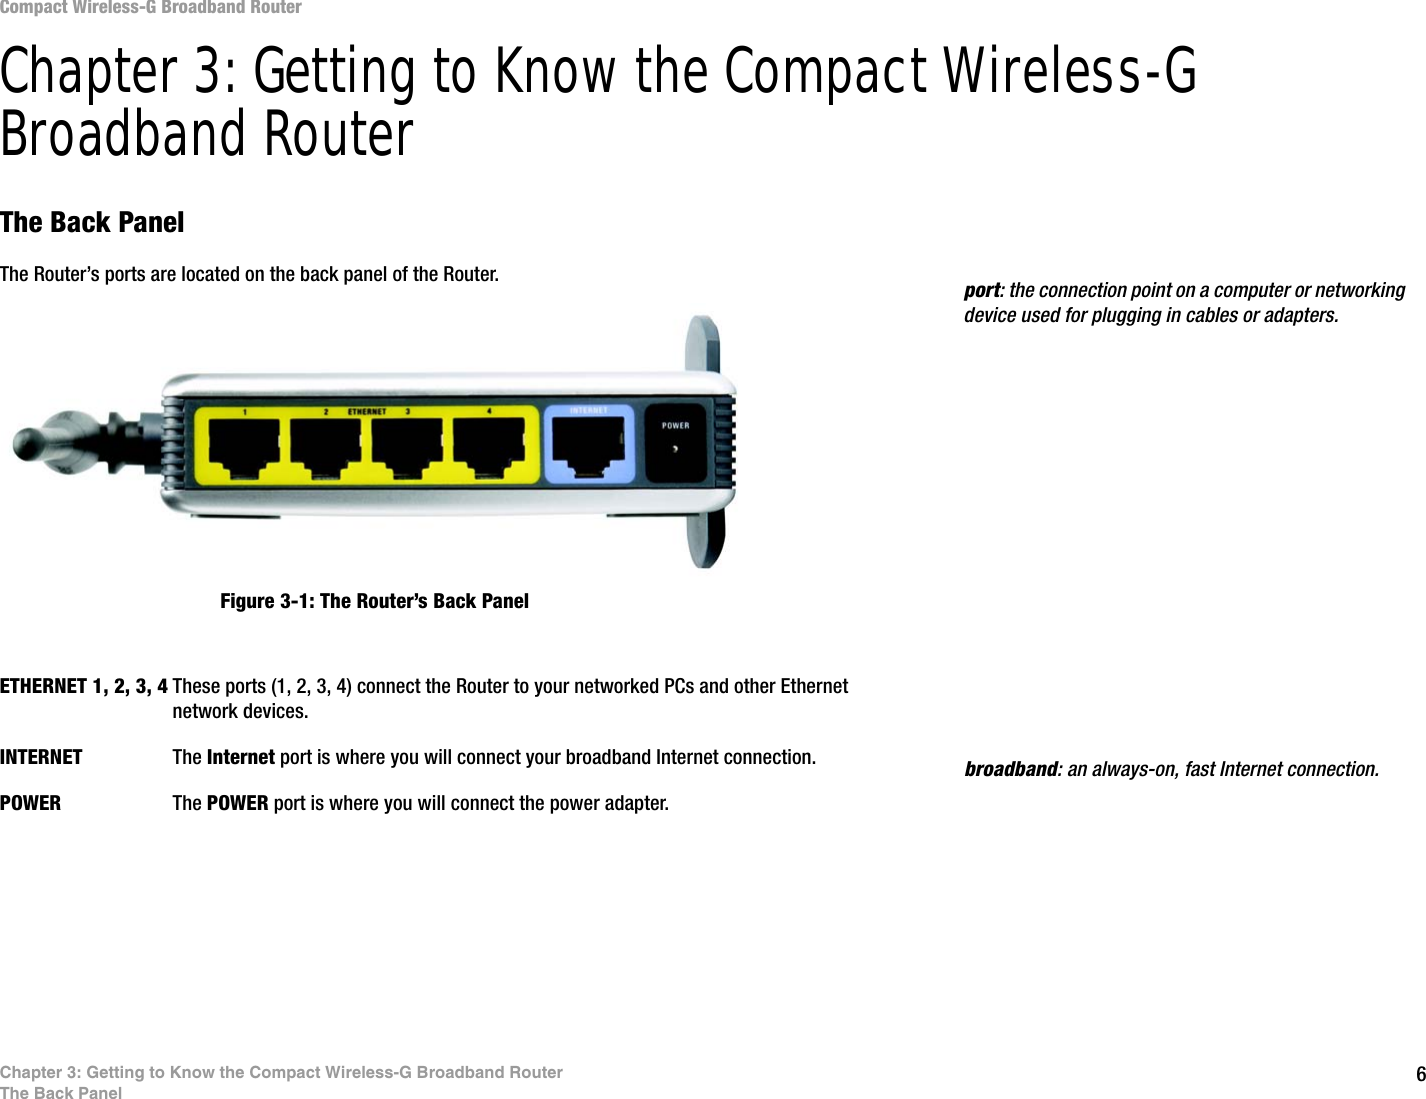 6Chapter 3: Getting to Know the Compact Wireless-G Broadband RouterThe Back PanelCompact Wireless-G Broadband RouterChapter 3: Getting to Know the Compact Wireless-G Broadband RouterThe Back PanelThe Router’s ports are located on the back panel of the Router.ETHERNET 1, 2, 3, 4 These ports (1, 2, 3, 4) connect the Router to your networked PCs and other Ethernet network devices.INTERNET The Internet port is where you will connect your broadband Internet connection.POWER The POWER port is where you will connect the power adapter.Figure 3-1: The Router’s Back Panelbroadband: an always-on, fast Internet connection.port: the connection point on a computer or networking device used for plugging in cables or adapters.